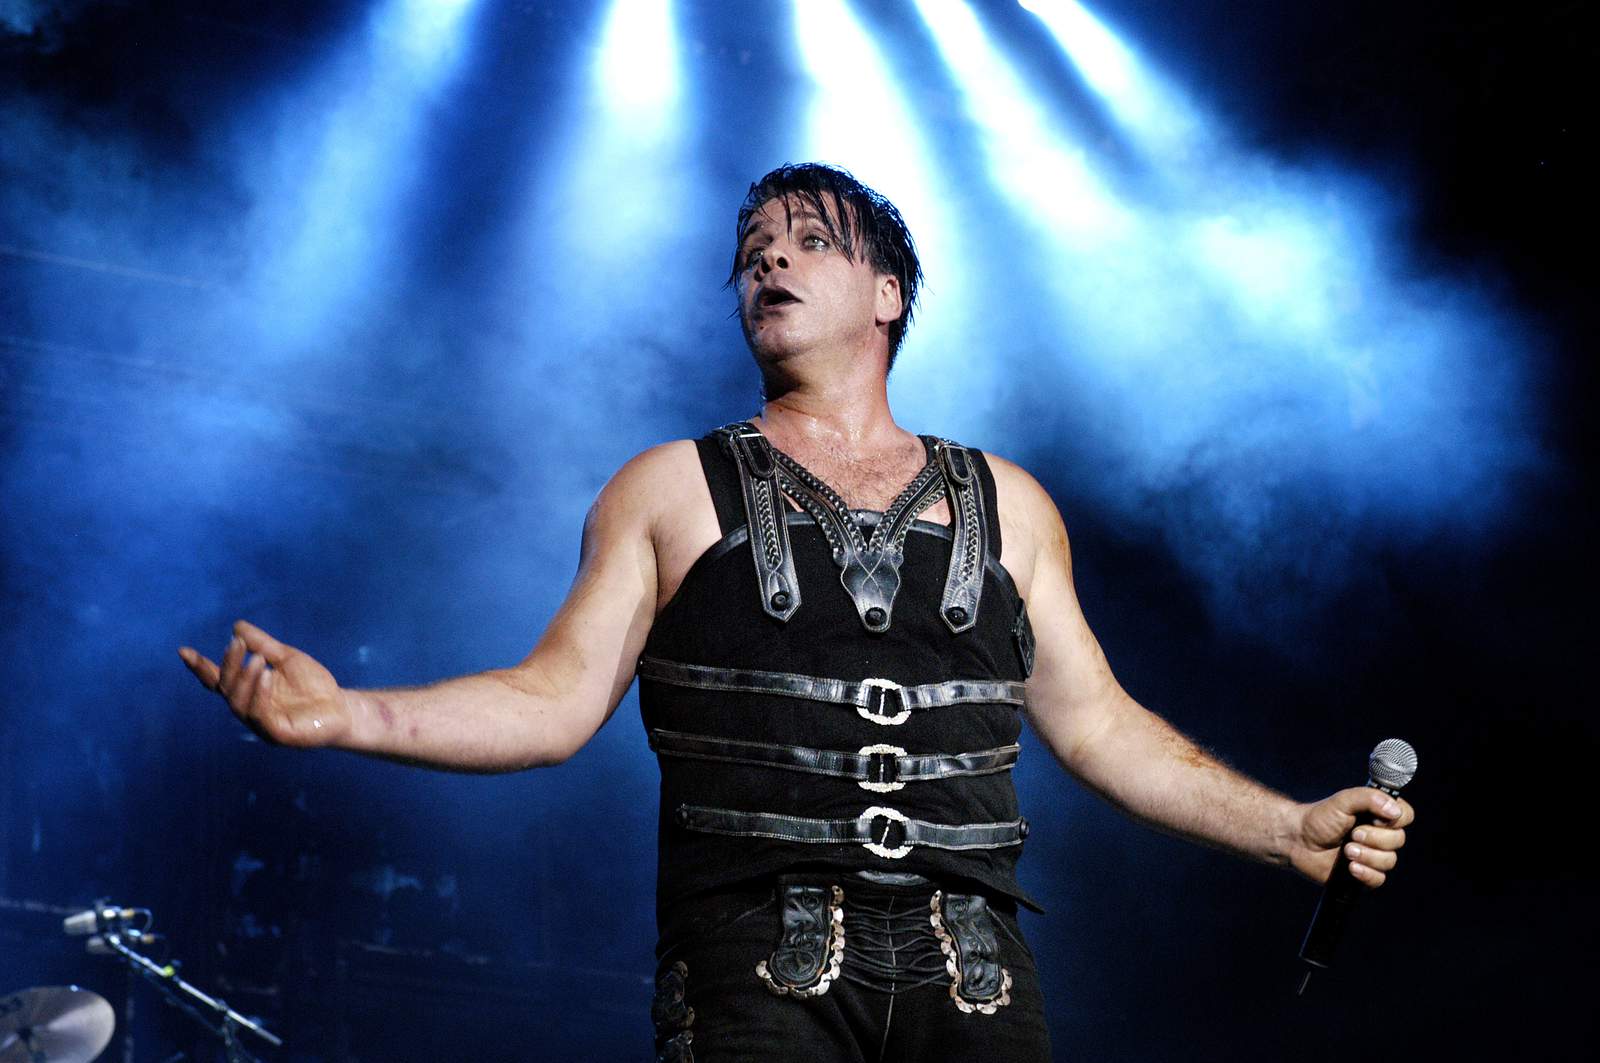 Rammstein coming to San Antonio for ‘exclusive’ 10-stop tour